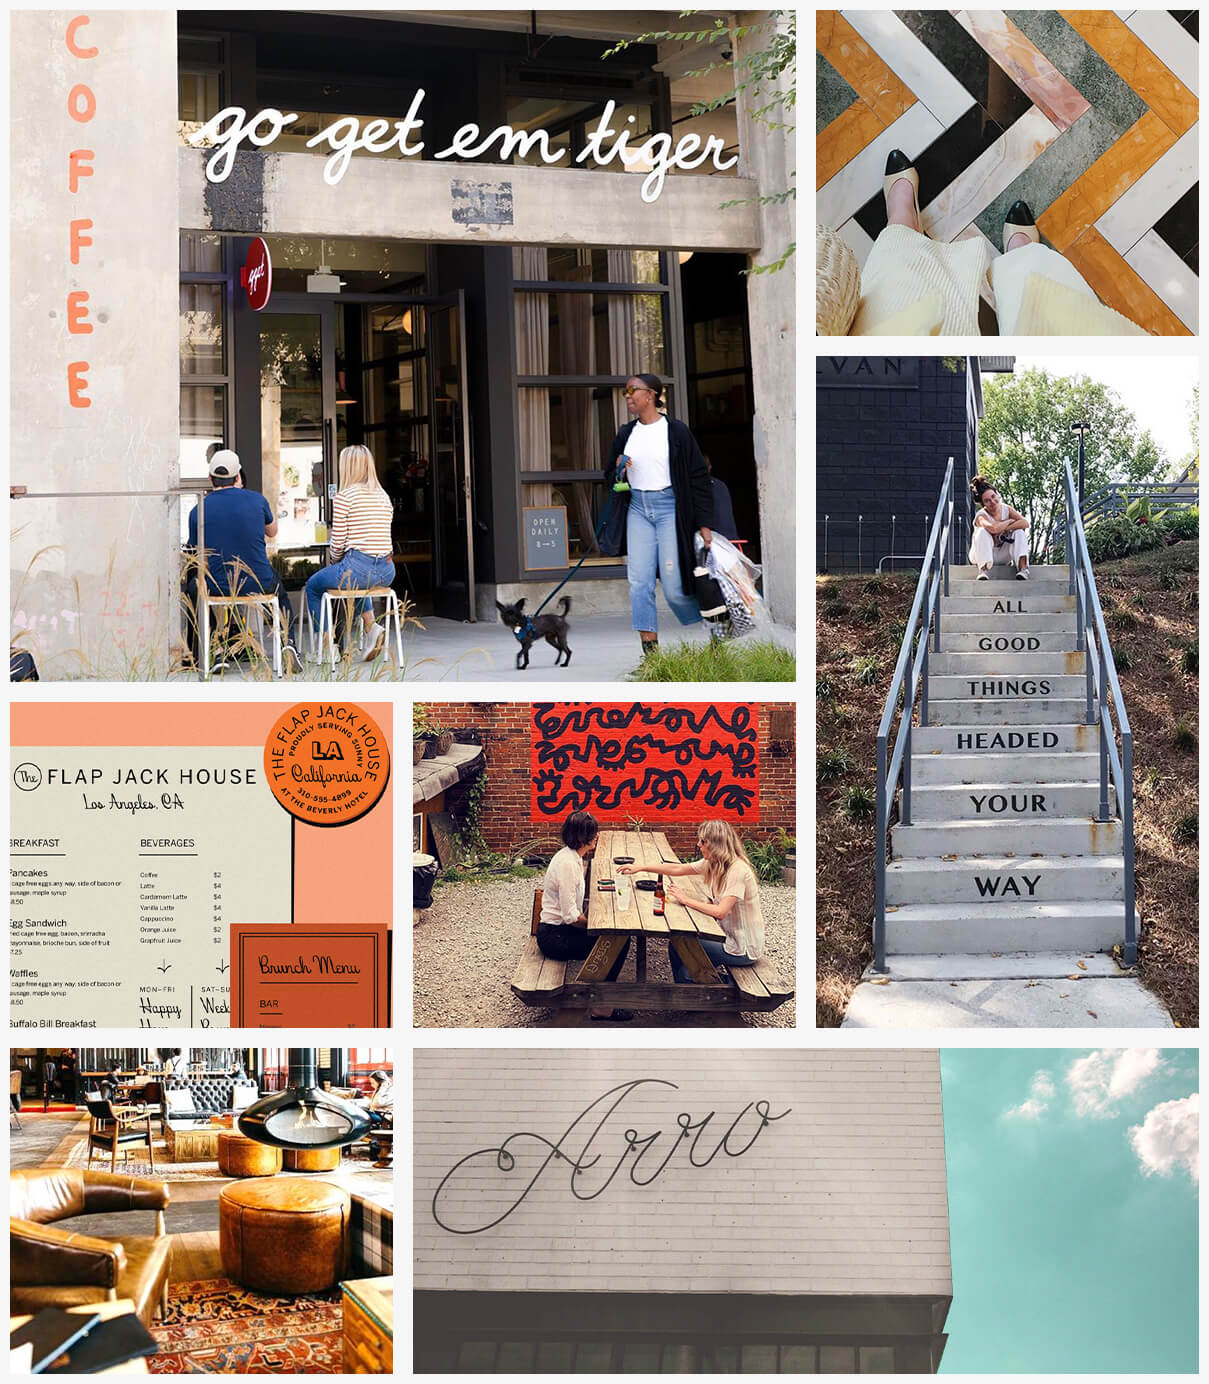 The Wayward moodboard featuring a colorful tile pattern, painted exterior mural art and signage